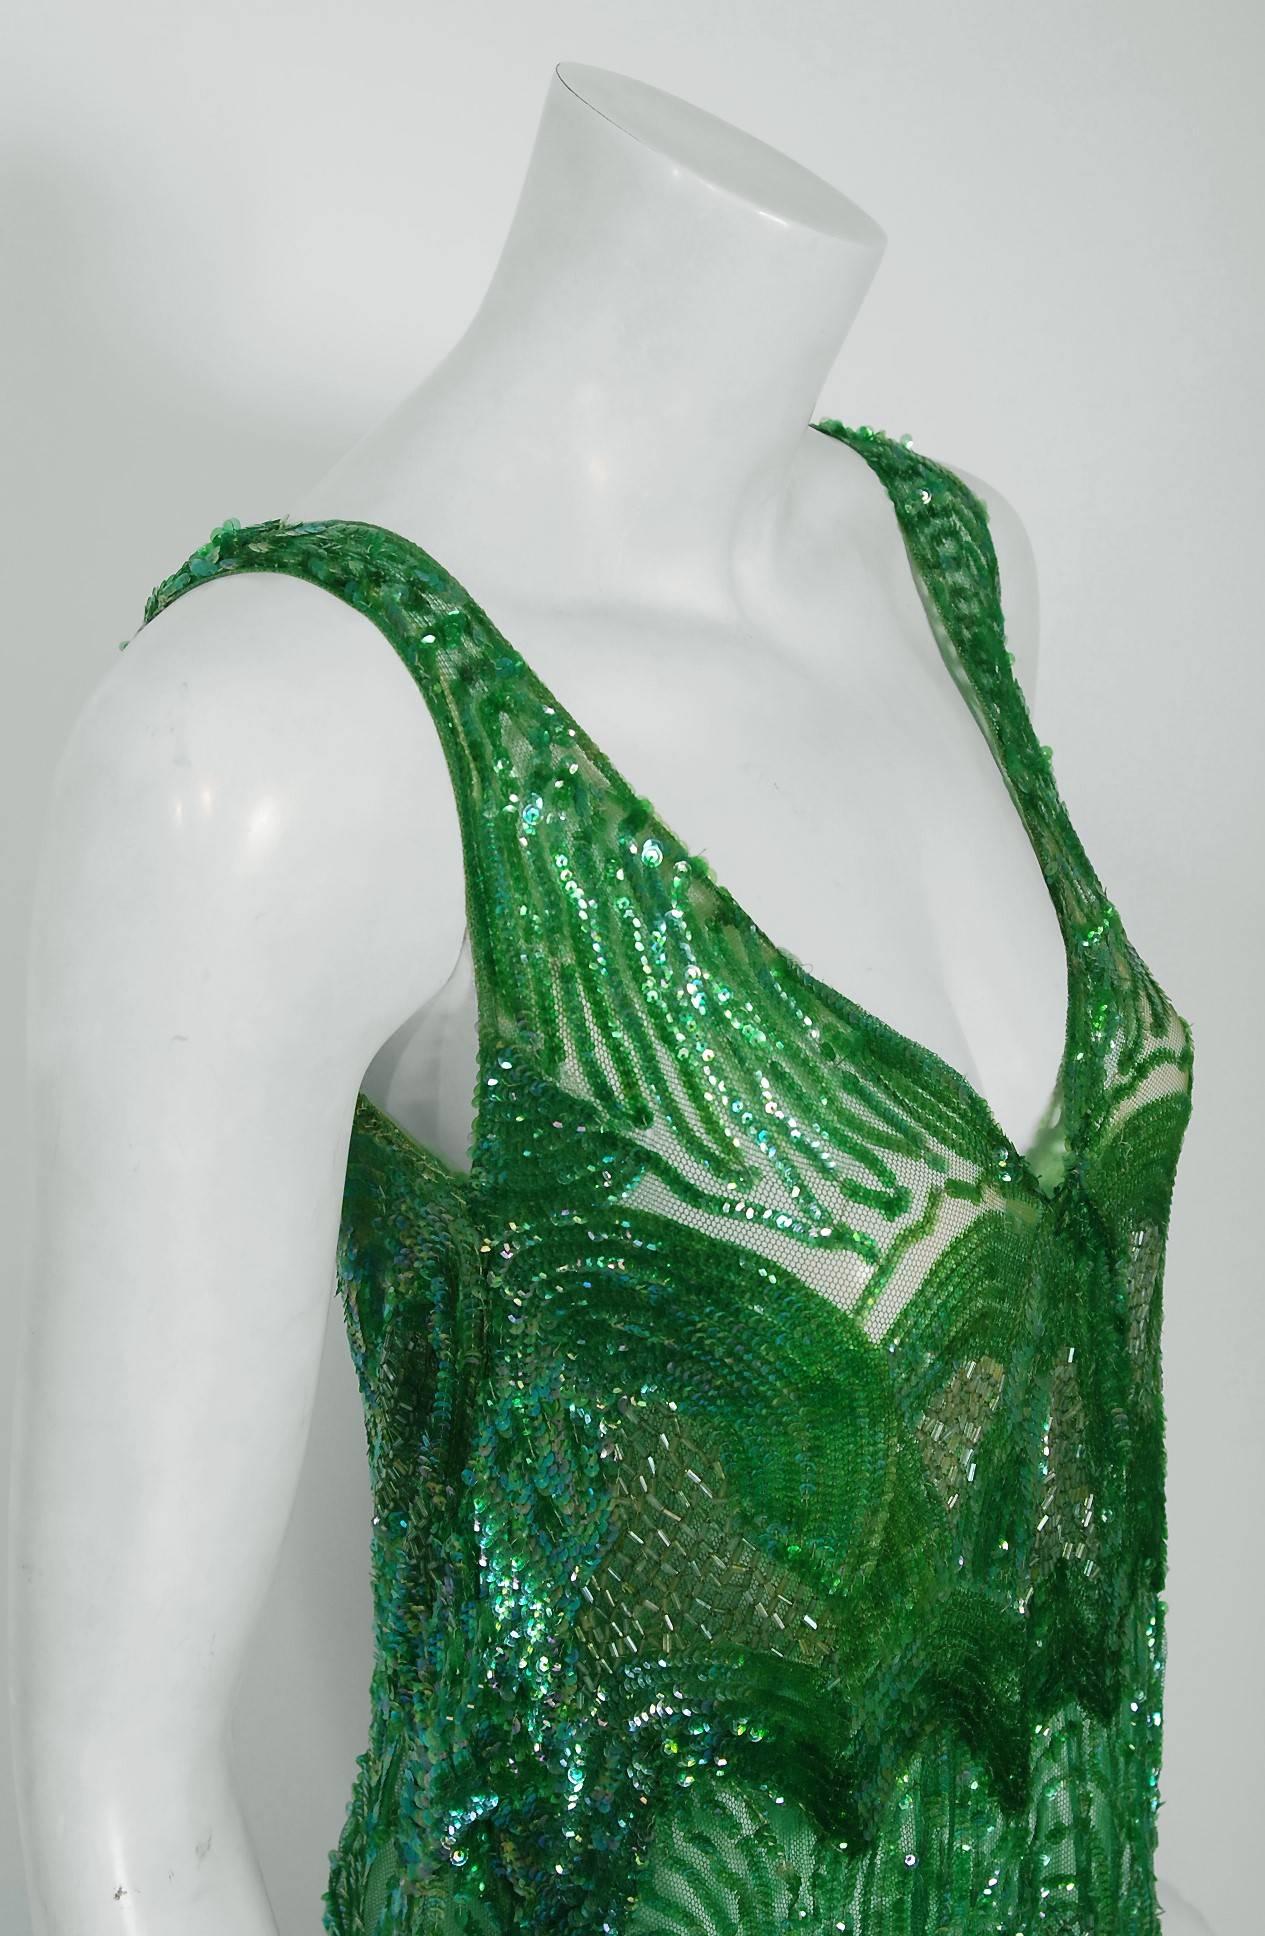 Breathtaking 1920's museum quality sparkling sheer-net flapper dance dress. The vibrant emerald green color palette touches a deep chord in our collective aesthetic consciousness. As fashion lovers, we never tire from antique beadwork; it will